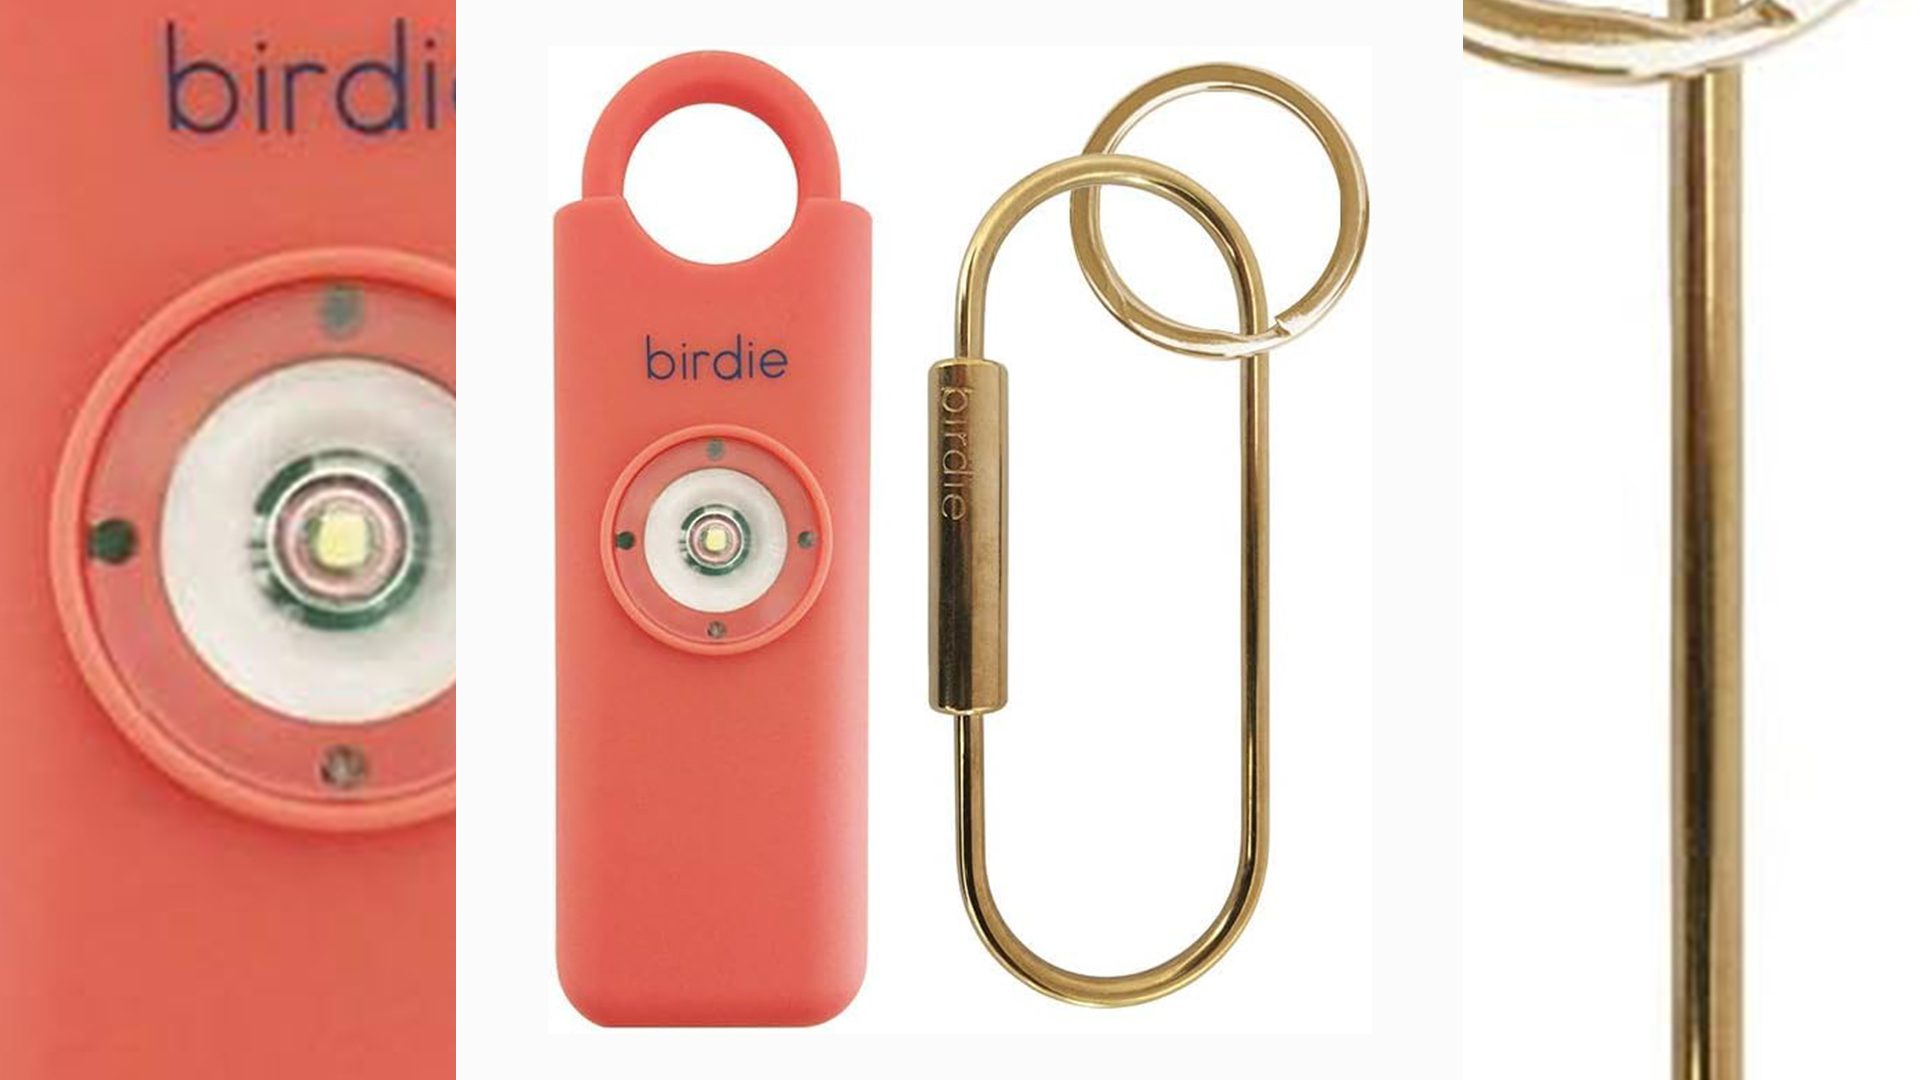 Birdie Personal Safety Alarm Travel Tech Products